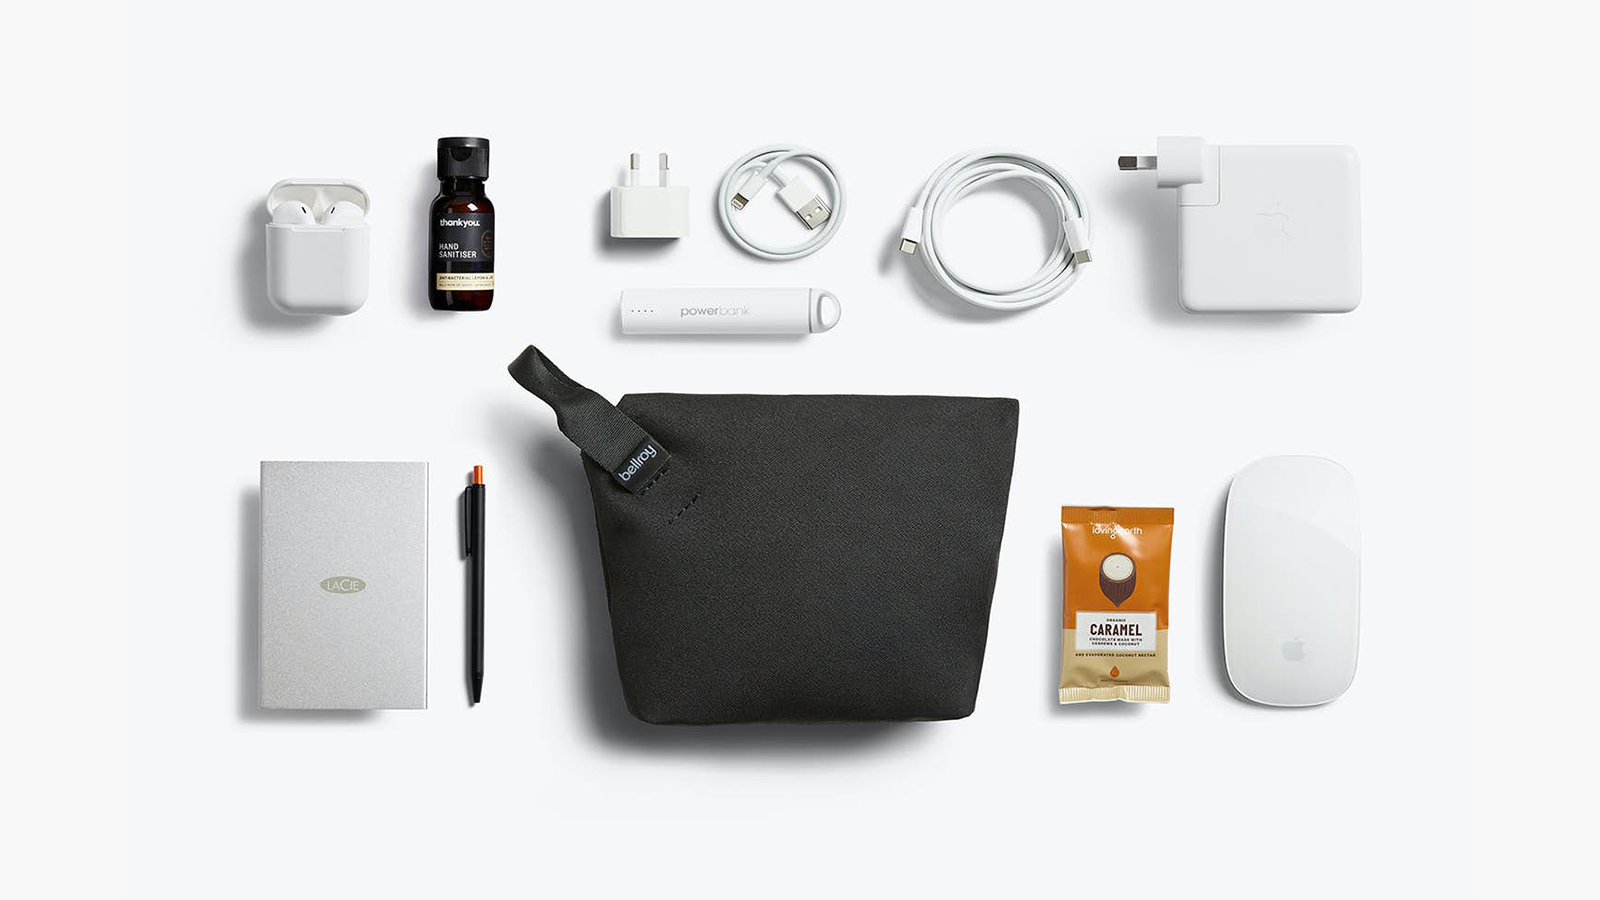 Bellroy Standing Pouch